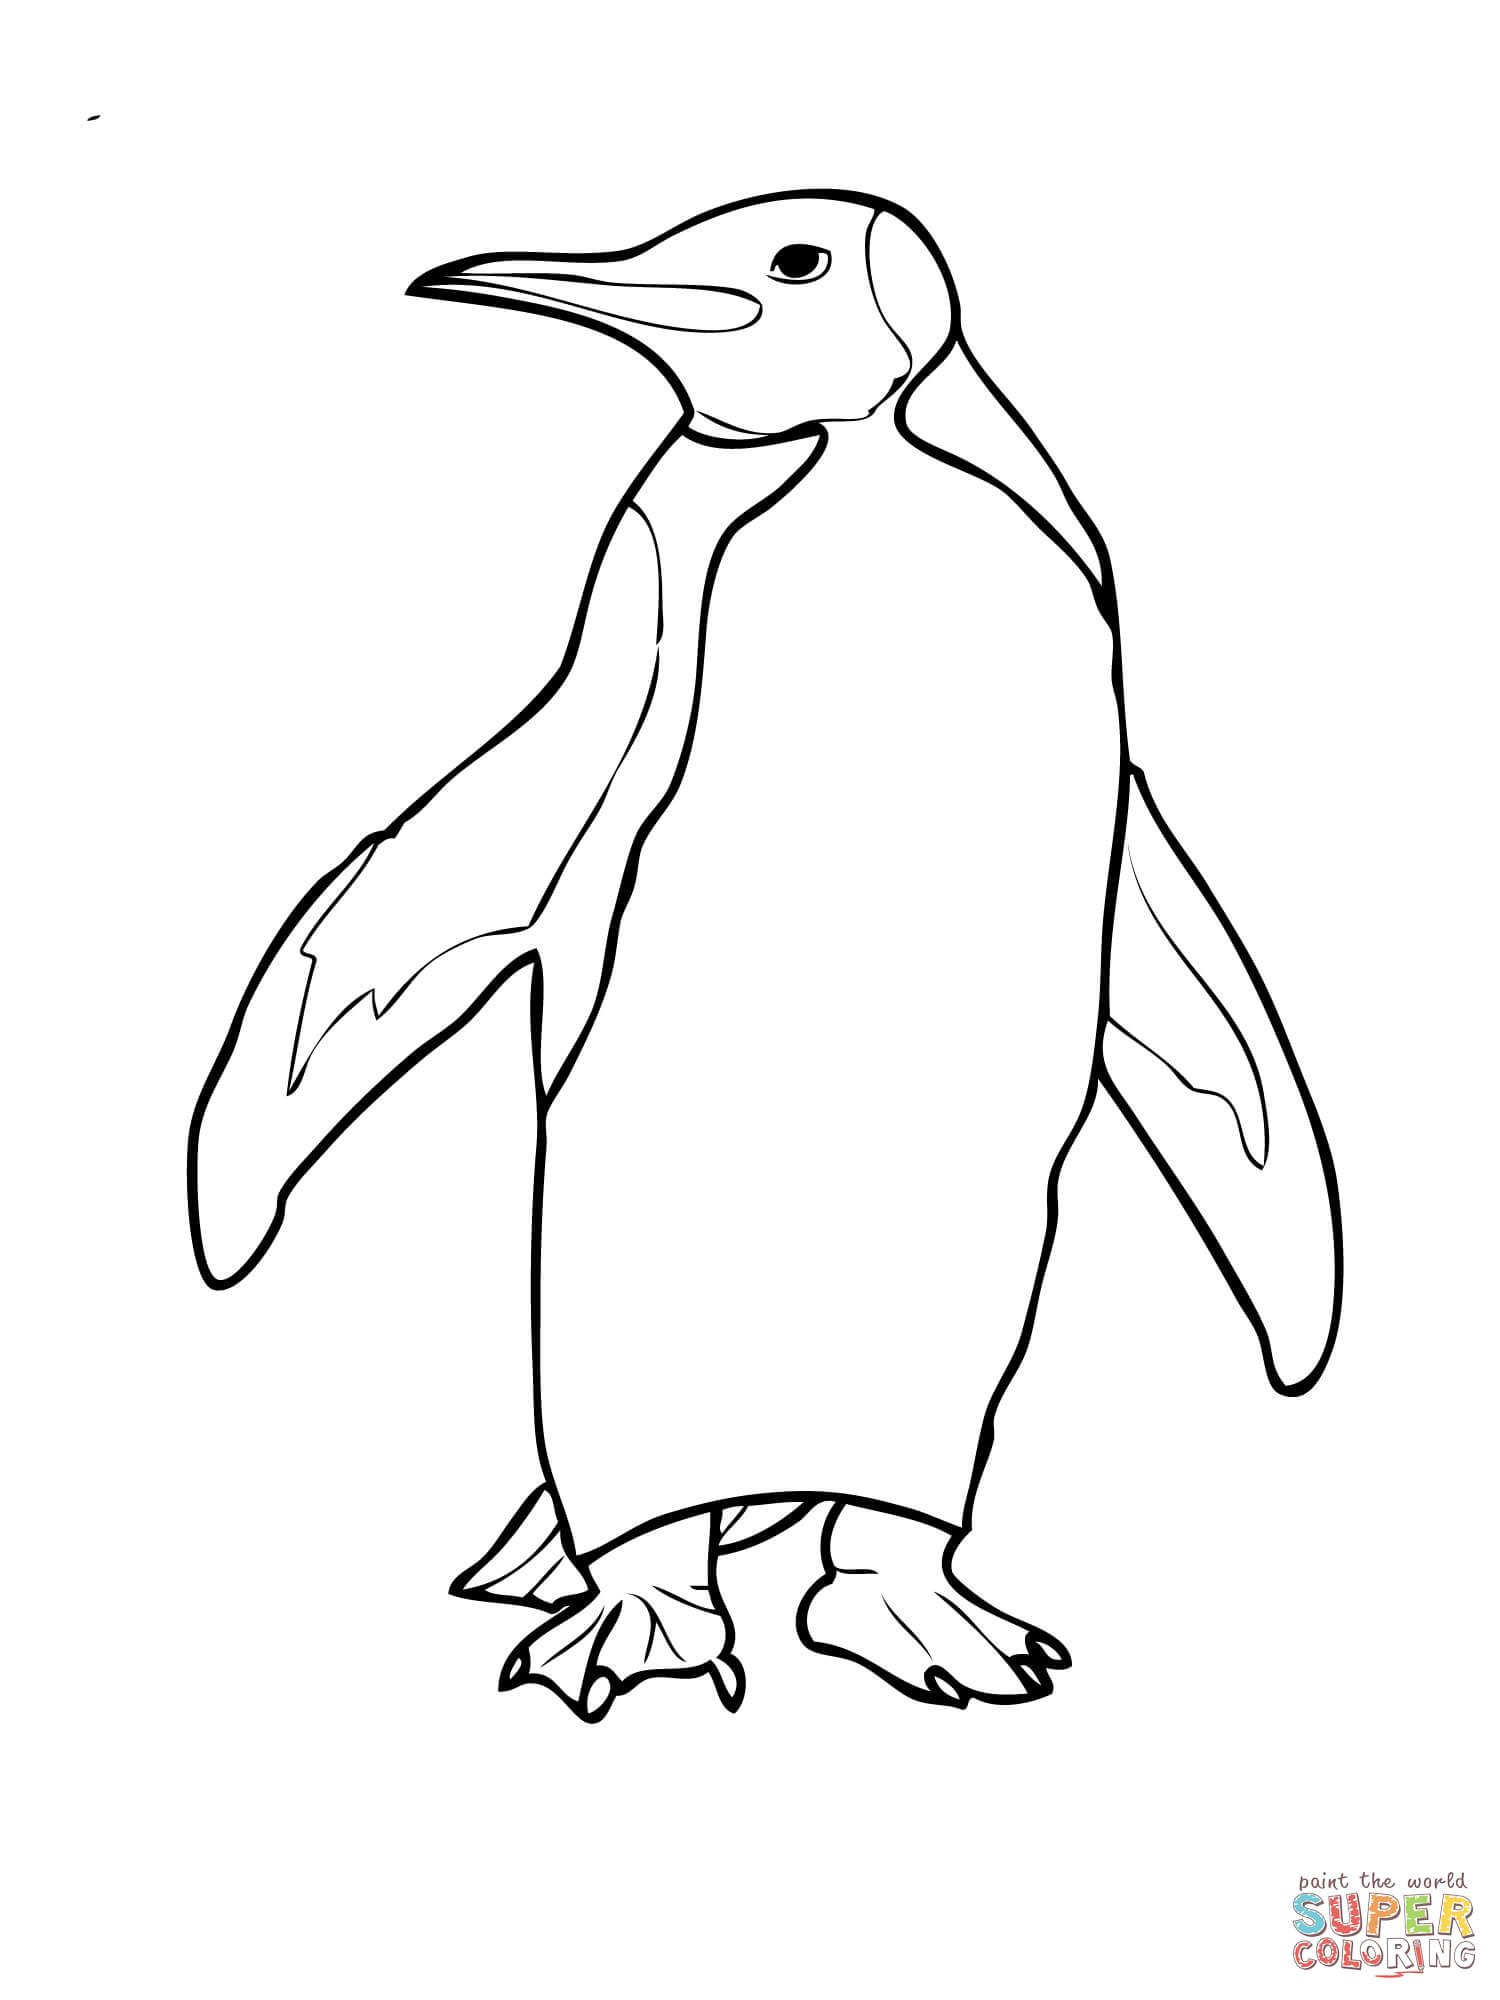 Penguins coloring pages | Free Coloring Pages